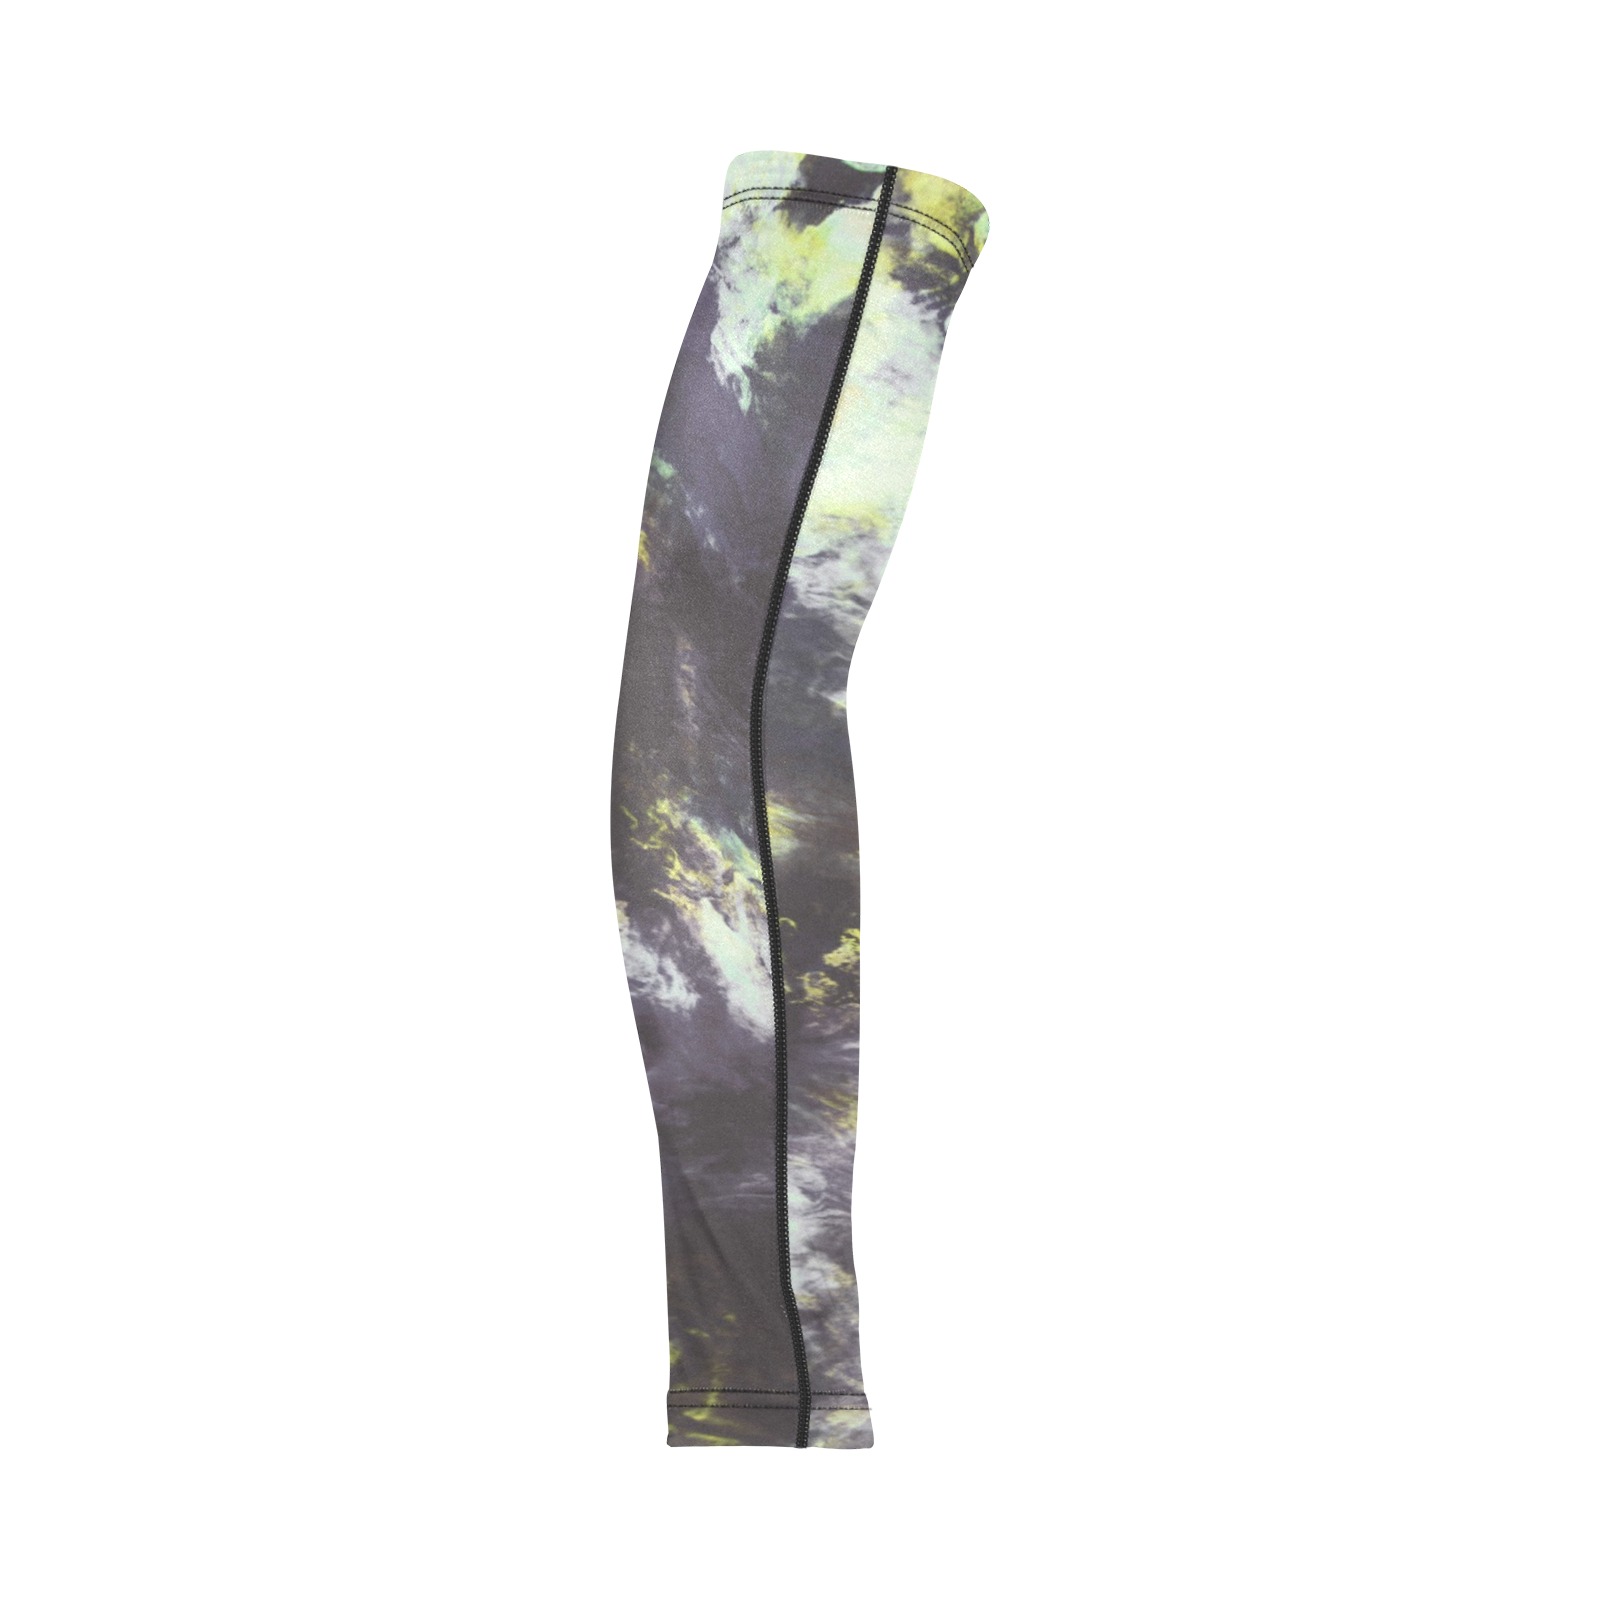 Green and black colorful marbling Arm Sleeves (Set of Two)